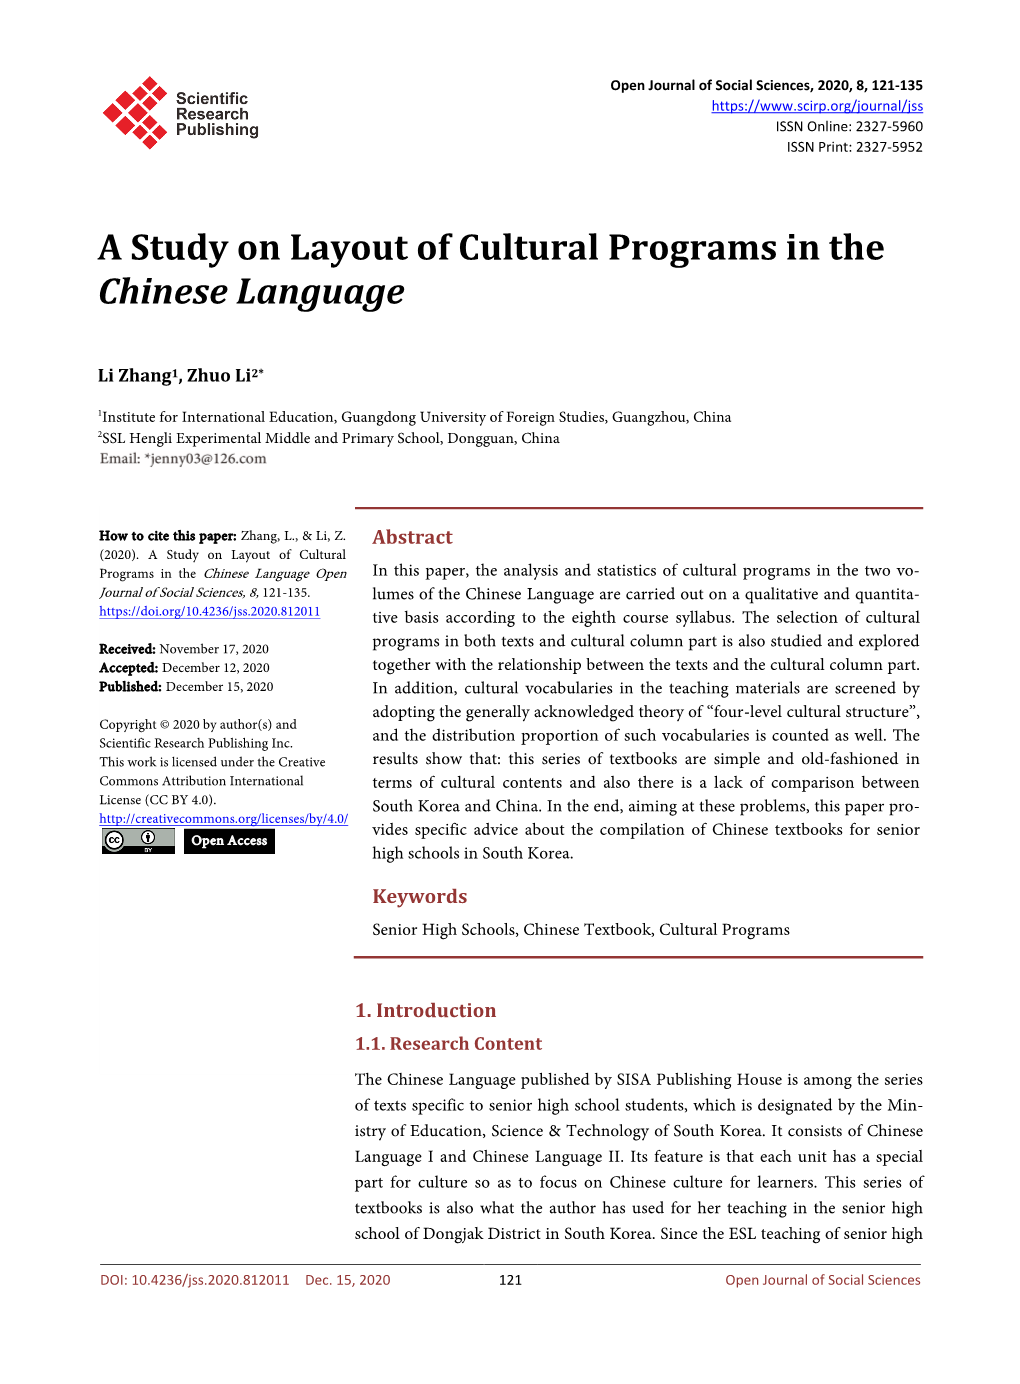 A Study on Layout of Cultural Programs in the Chinese Language